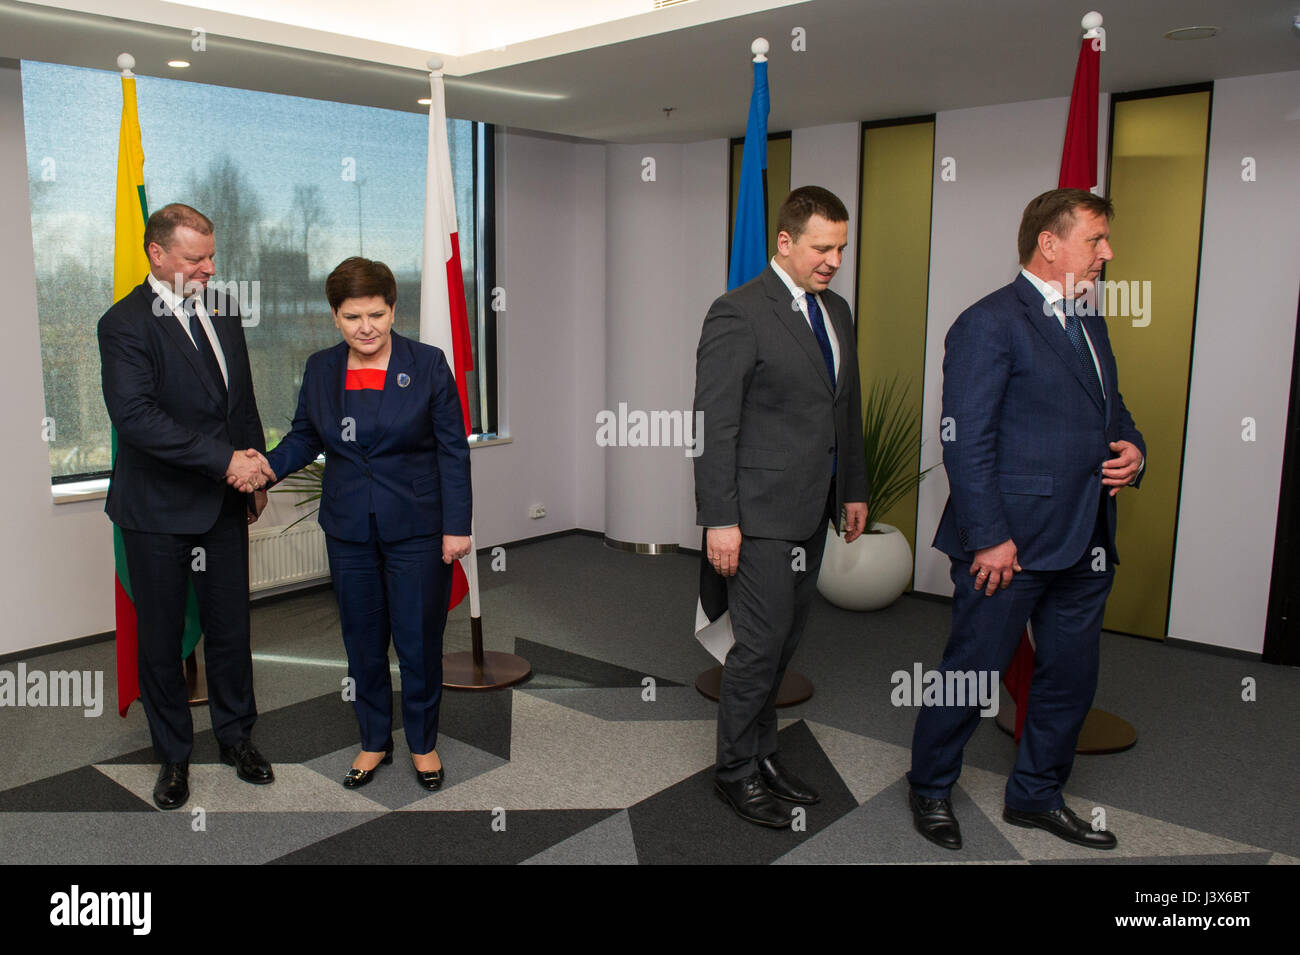 Tallinn, Estonia, 8th May 2017. Prime Minister of Estonia Juri Ratas (2nd R), Prime Minister of Latvia Maris Kucinskis (R), Prime Minister of Lithuania Saulius Skvernelis (L) and Prime Minister of Poland Beata Szydlo(2nd L) pose for a family photo prior their meeting in Tallinn. The topics of the meeting were regional security, energy community, transport connections and the future of the European Union. Credit: Nicolas Bouvy/Alamy Live News Stock Photo